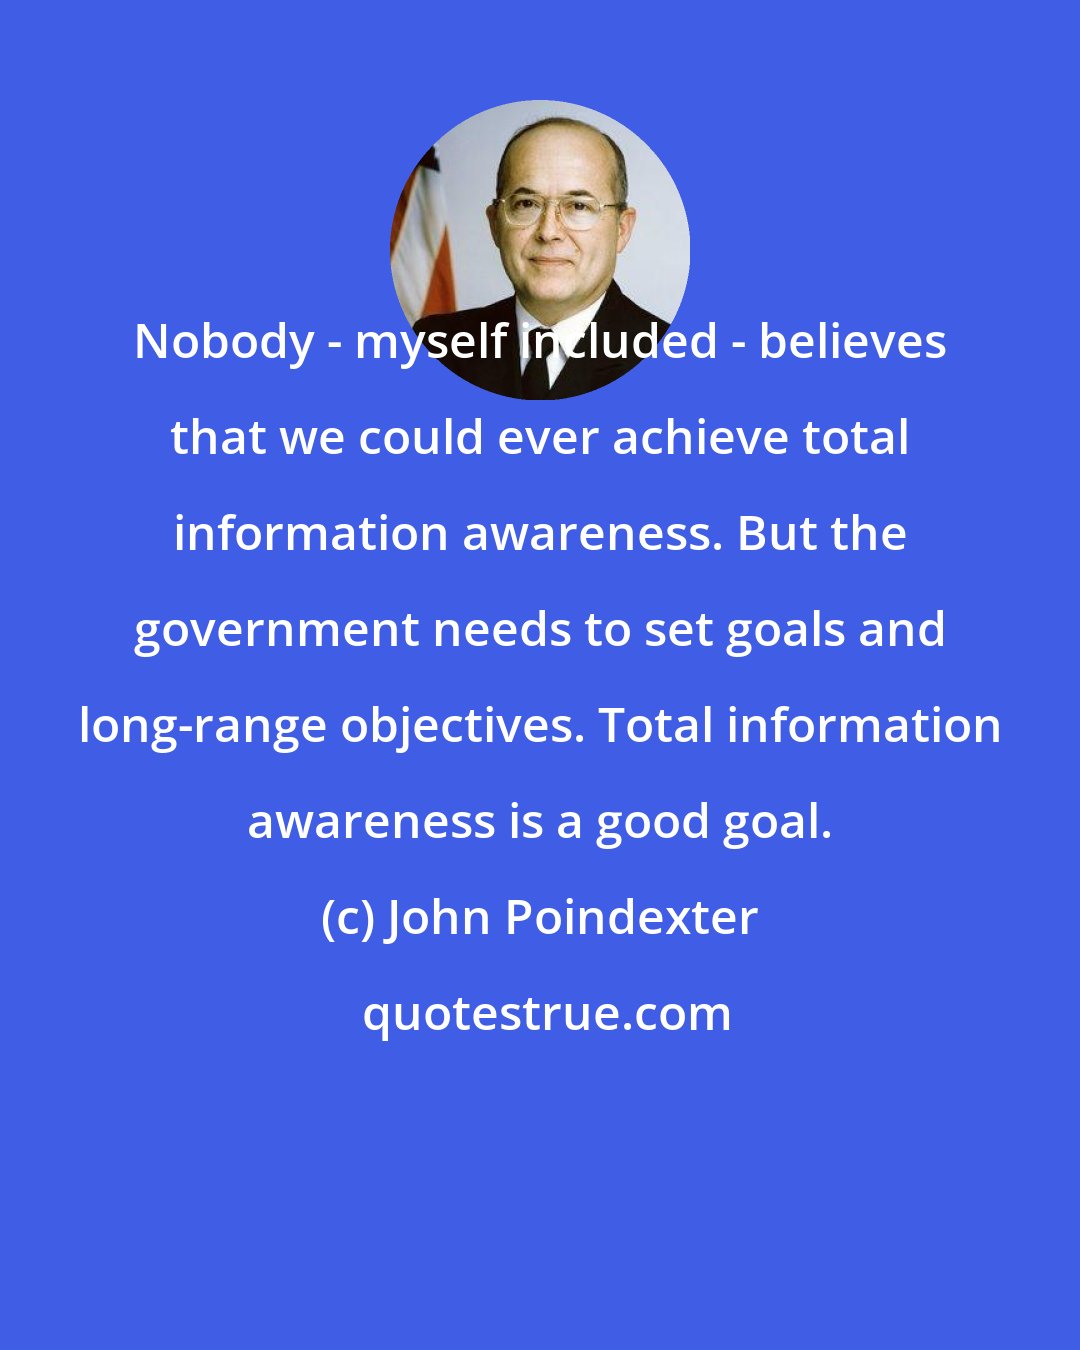 John Poindexter: Nobody - myself included - believes that we could ever achieve total information awareness. But the government needs to set goals and long-range objectives. Total information awareness is a good goal.